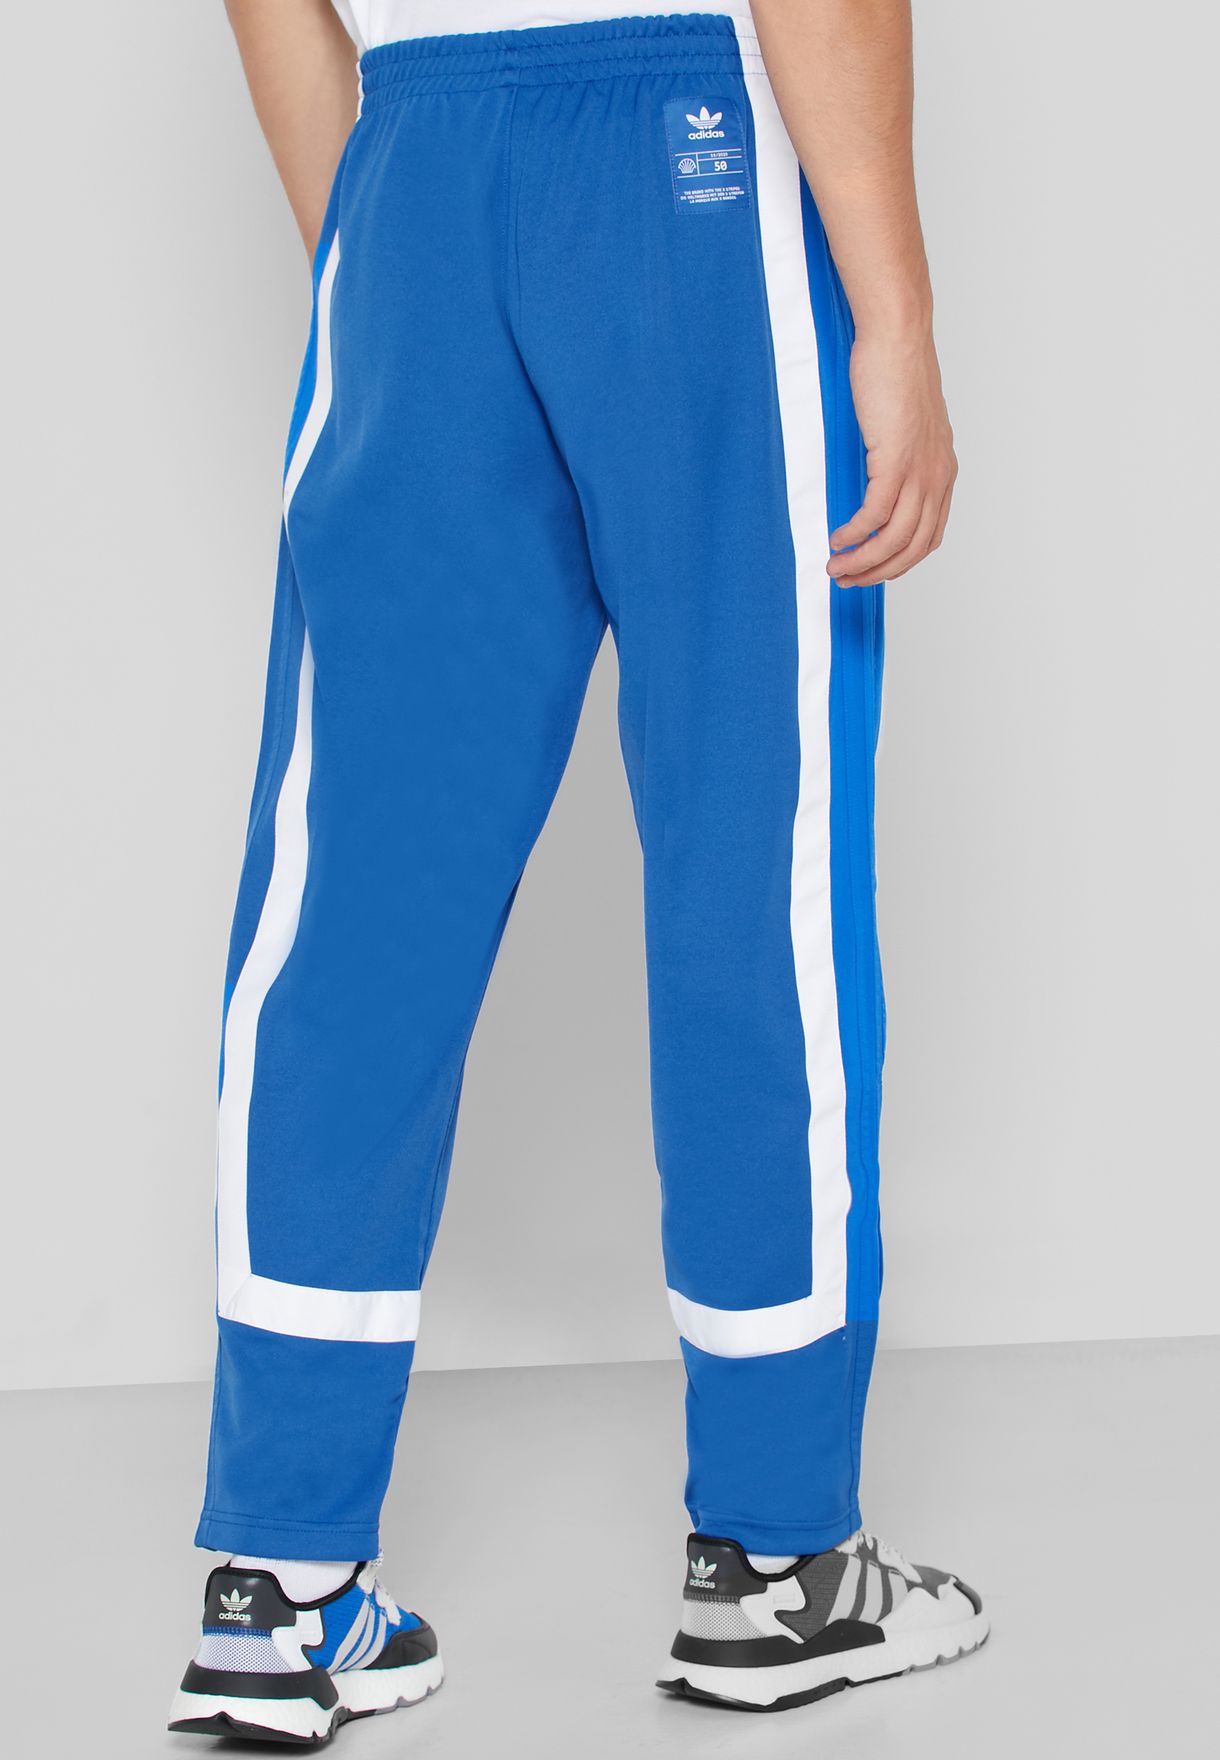 adidas warm up pants with zipper